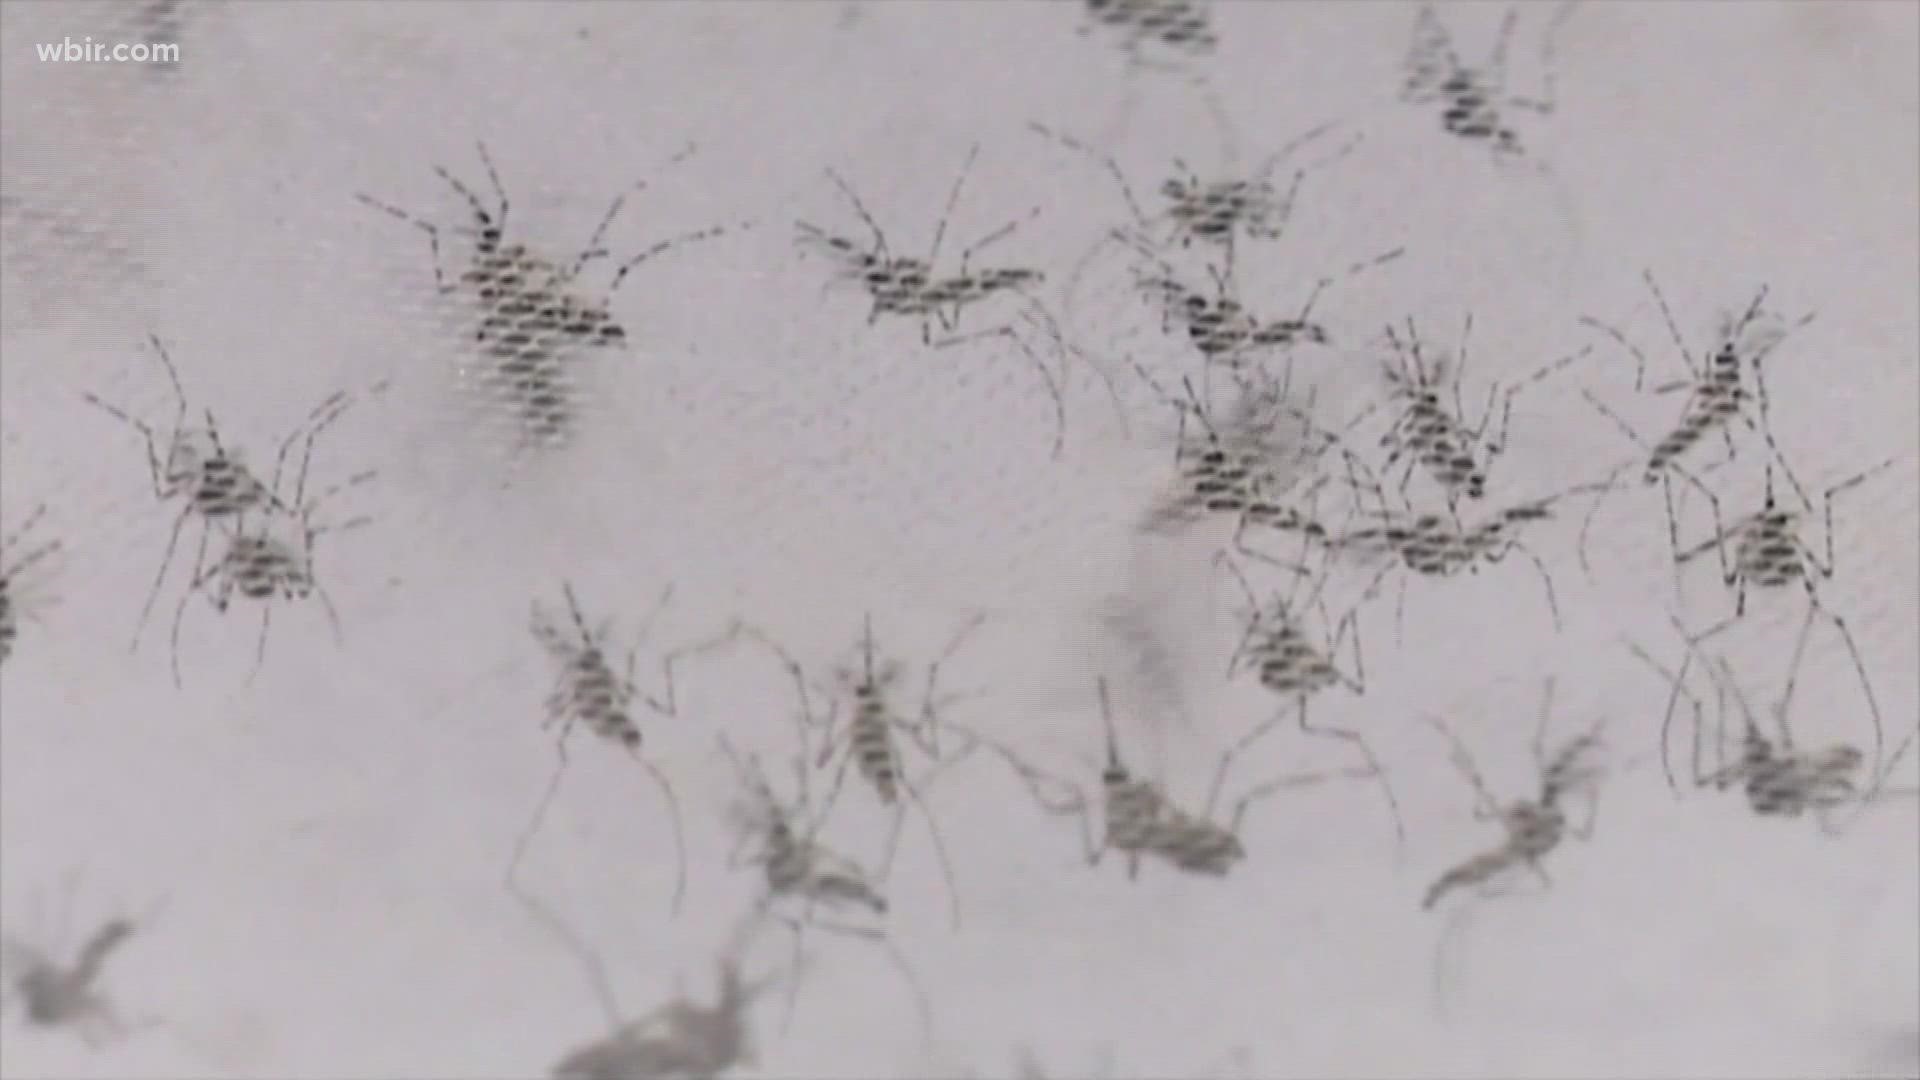 The summer-like temps also signal the start of mosquito season in east Tennessee.